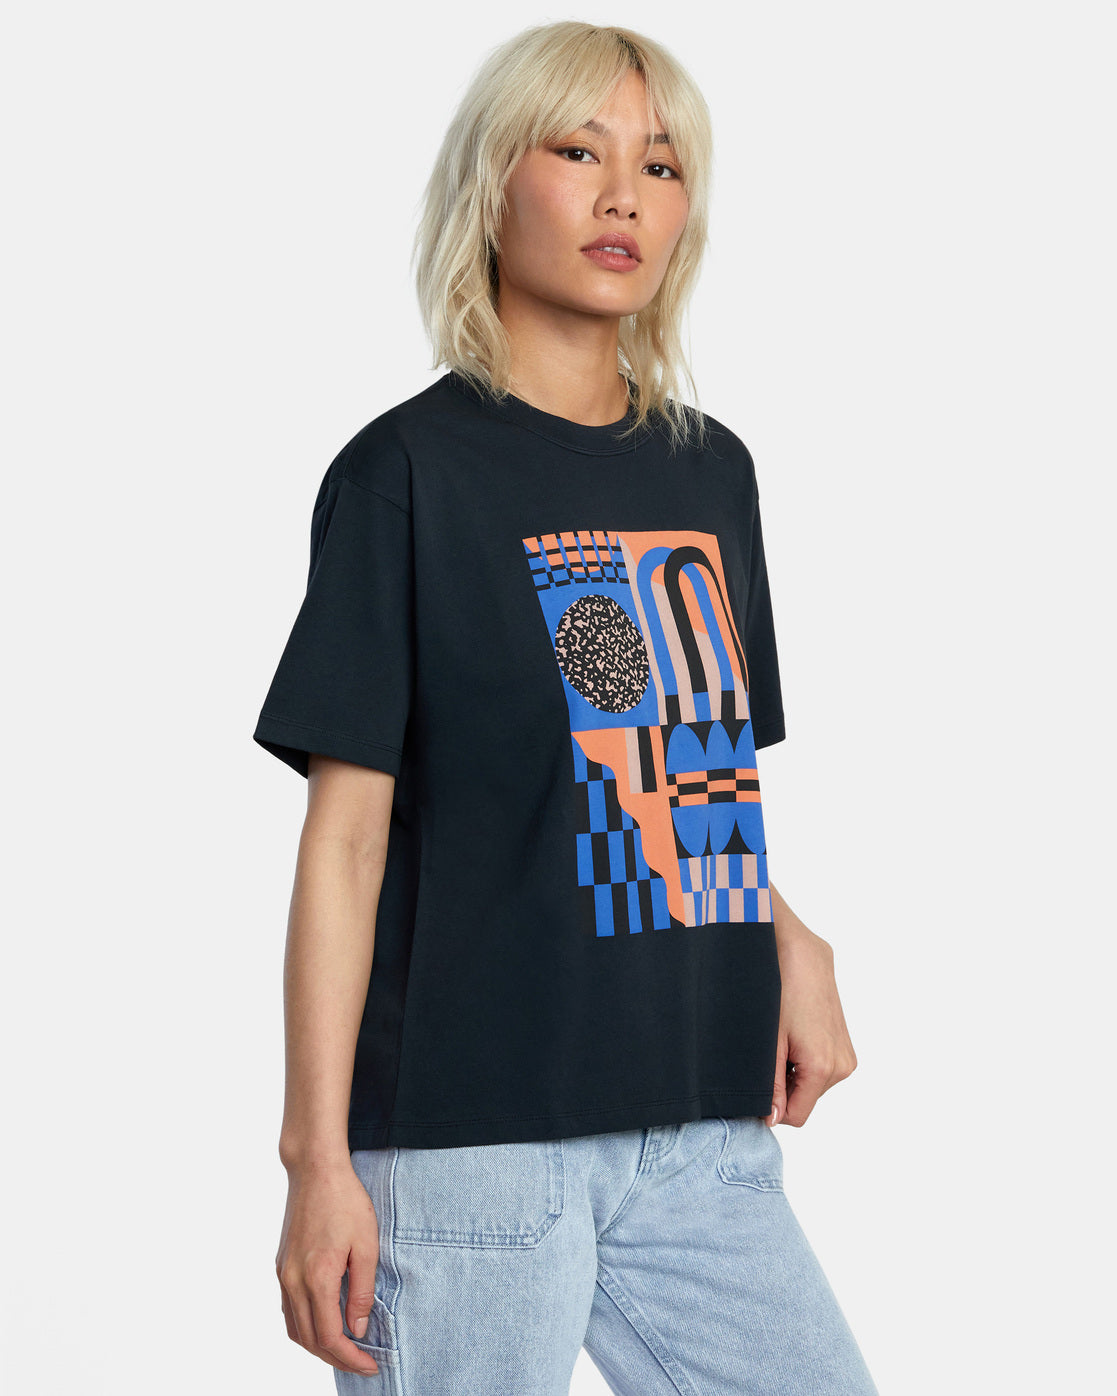 RVCA - Jesse Brown Shapes Andyday T-Shirt